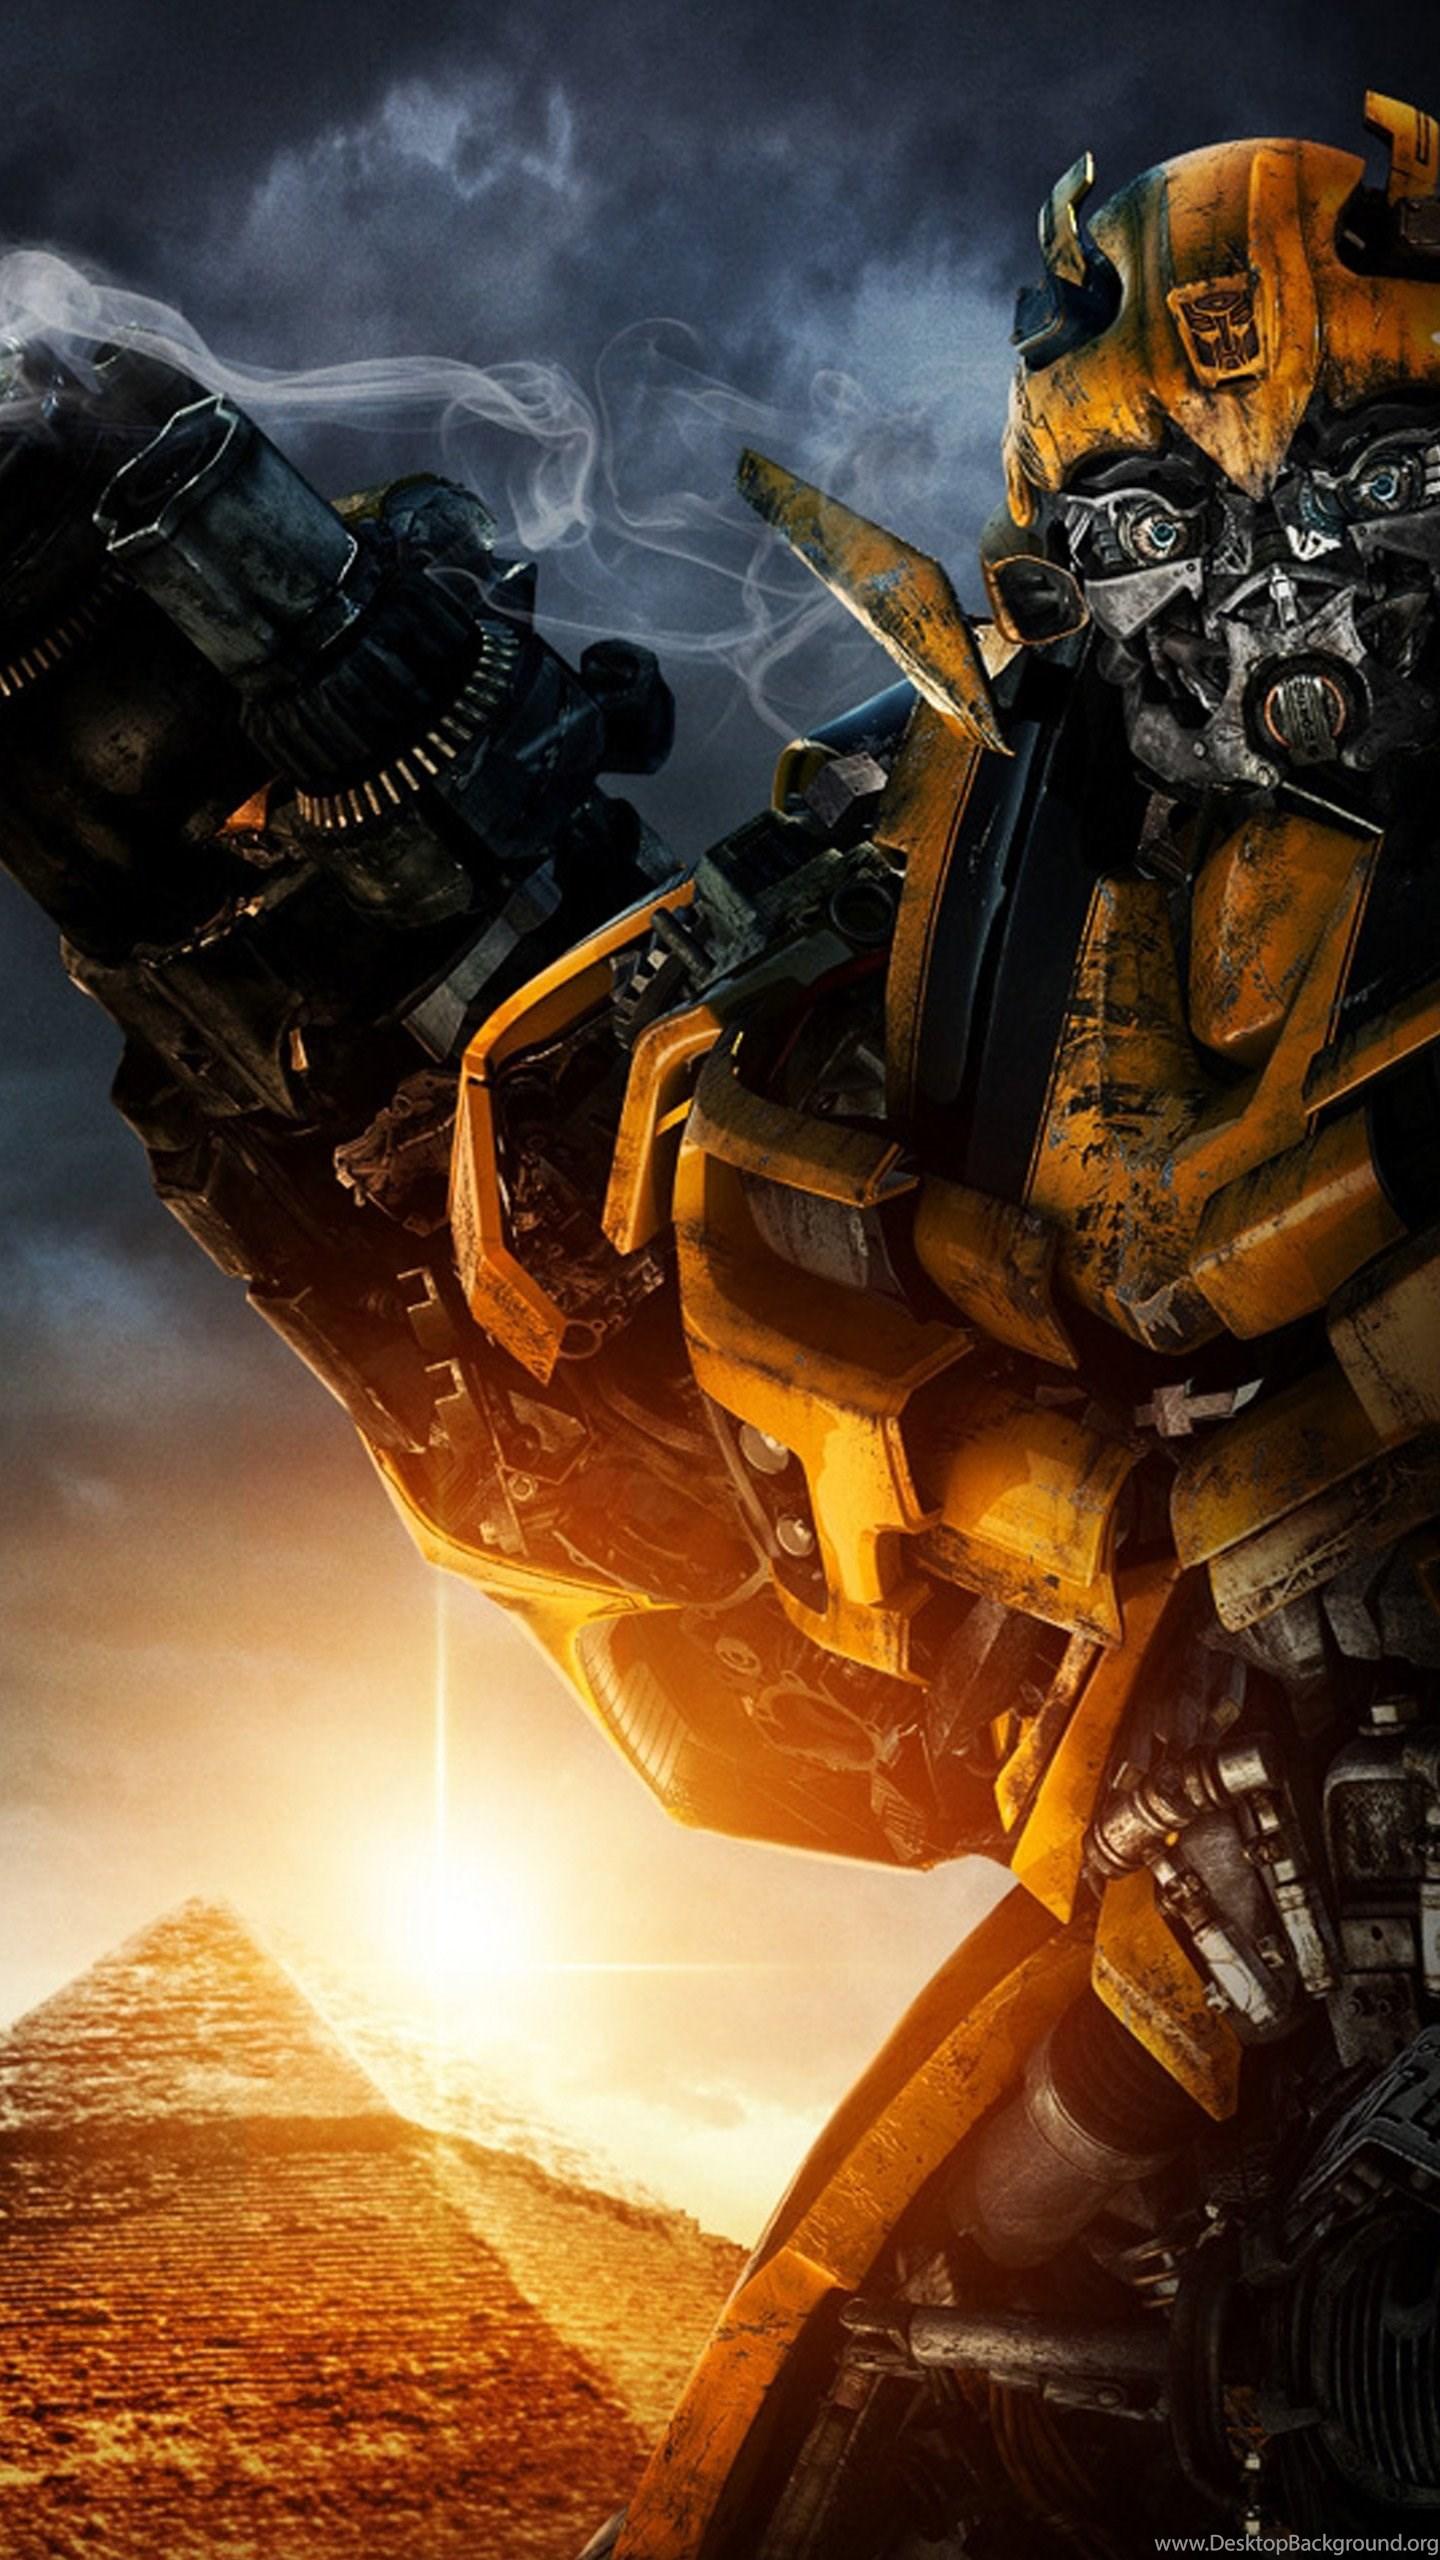 Transformers Rise of the Beasts 5K Bumblebee Wallpaper, HD Movies 4K  Wallpapers, Images and Background - Wallpapers Den